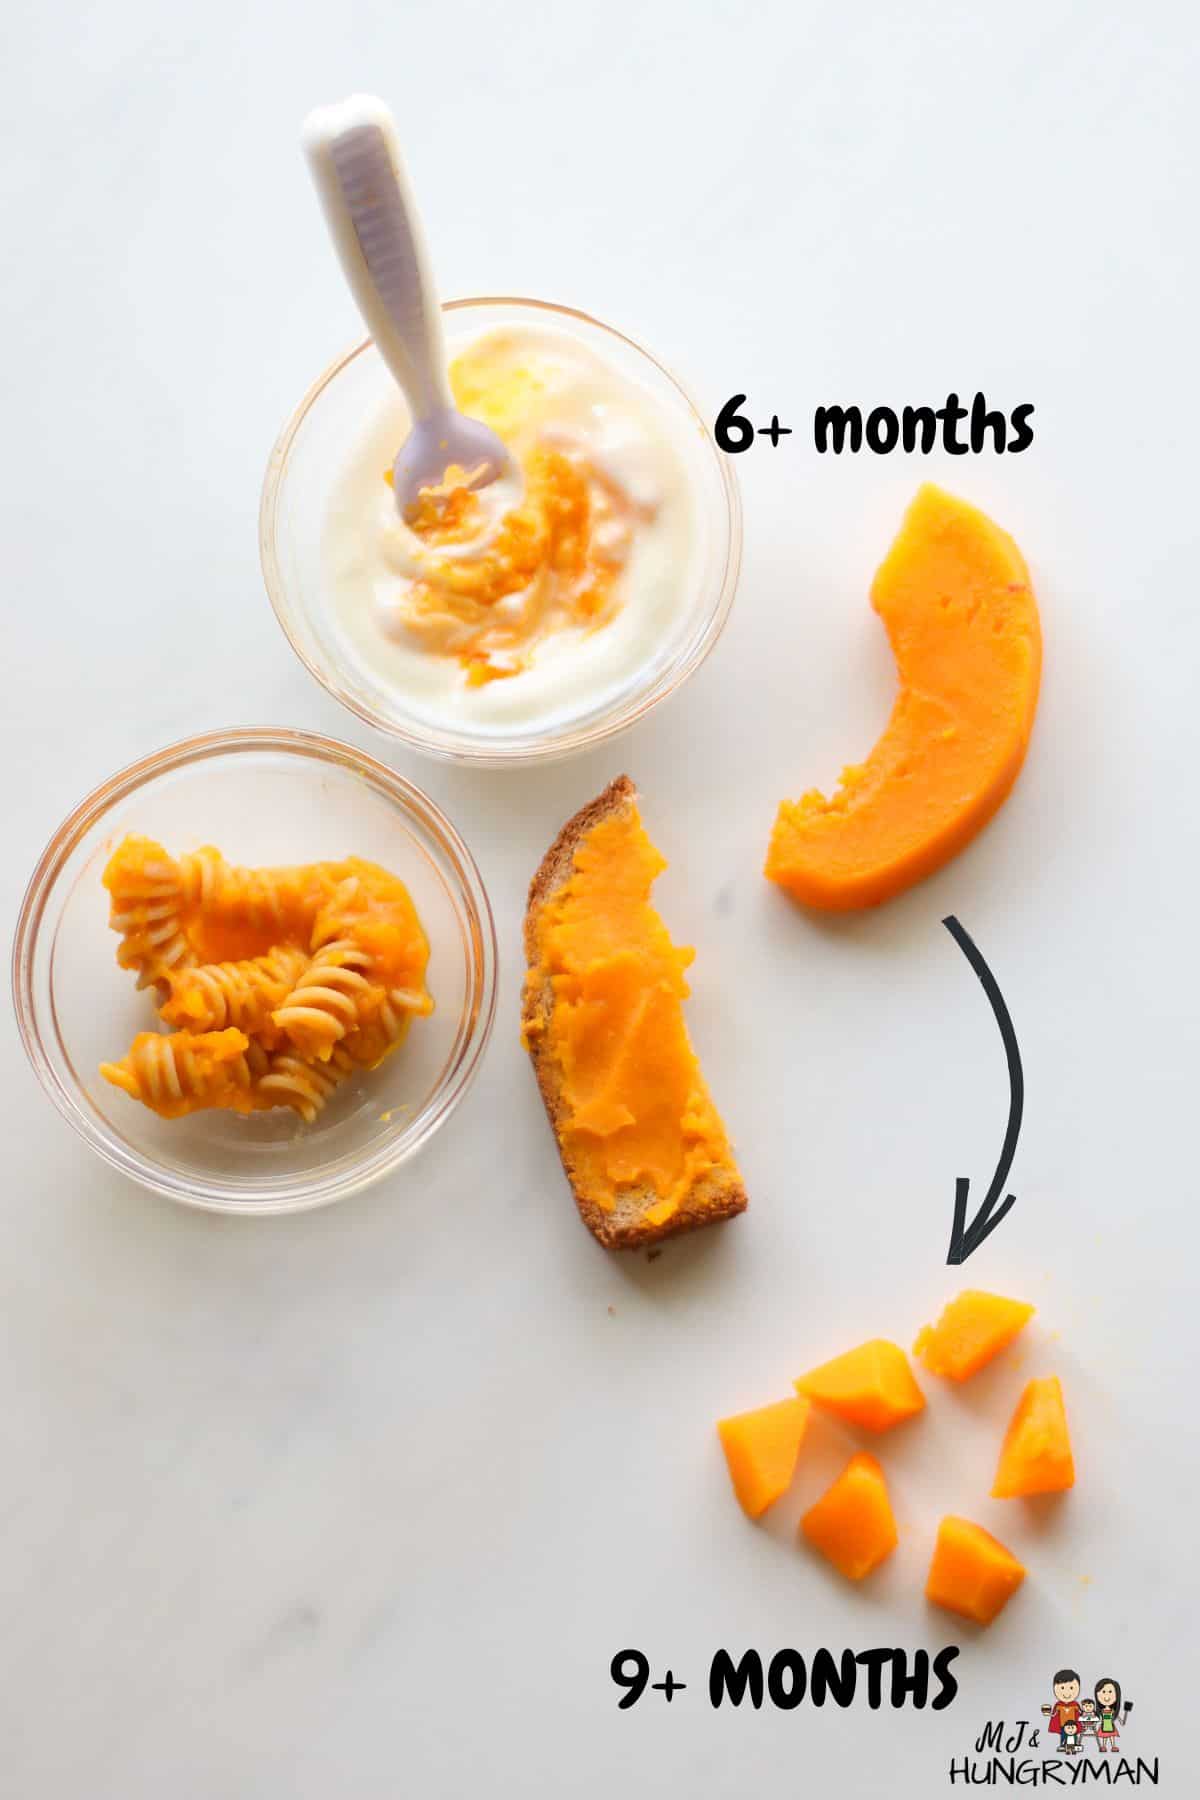 A visual showing how to serve pumpkin according to baby's age.